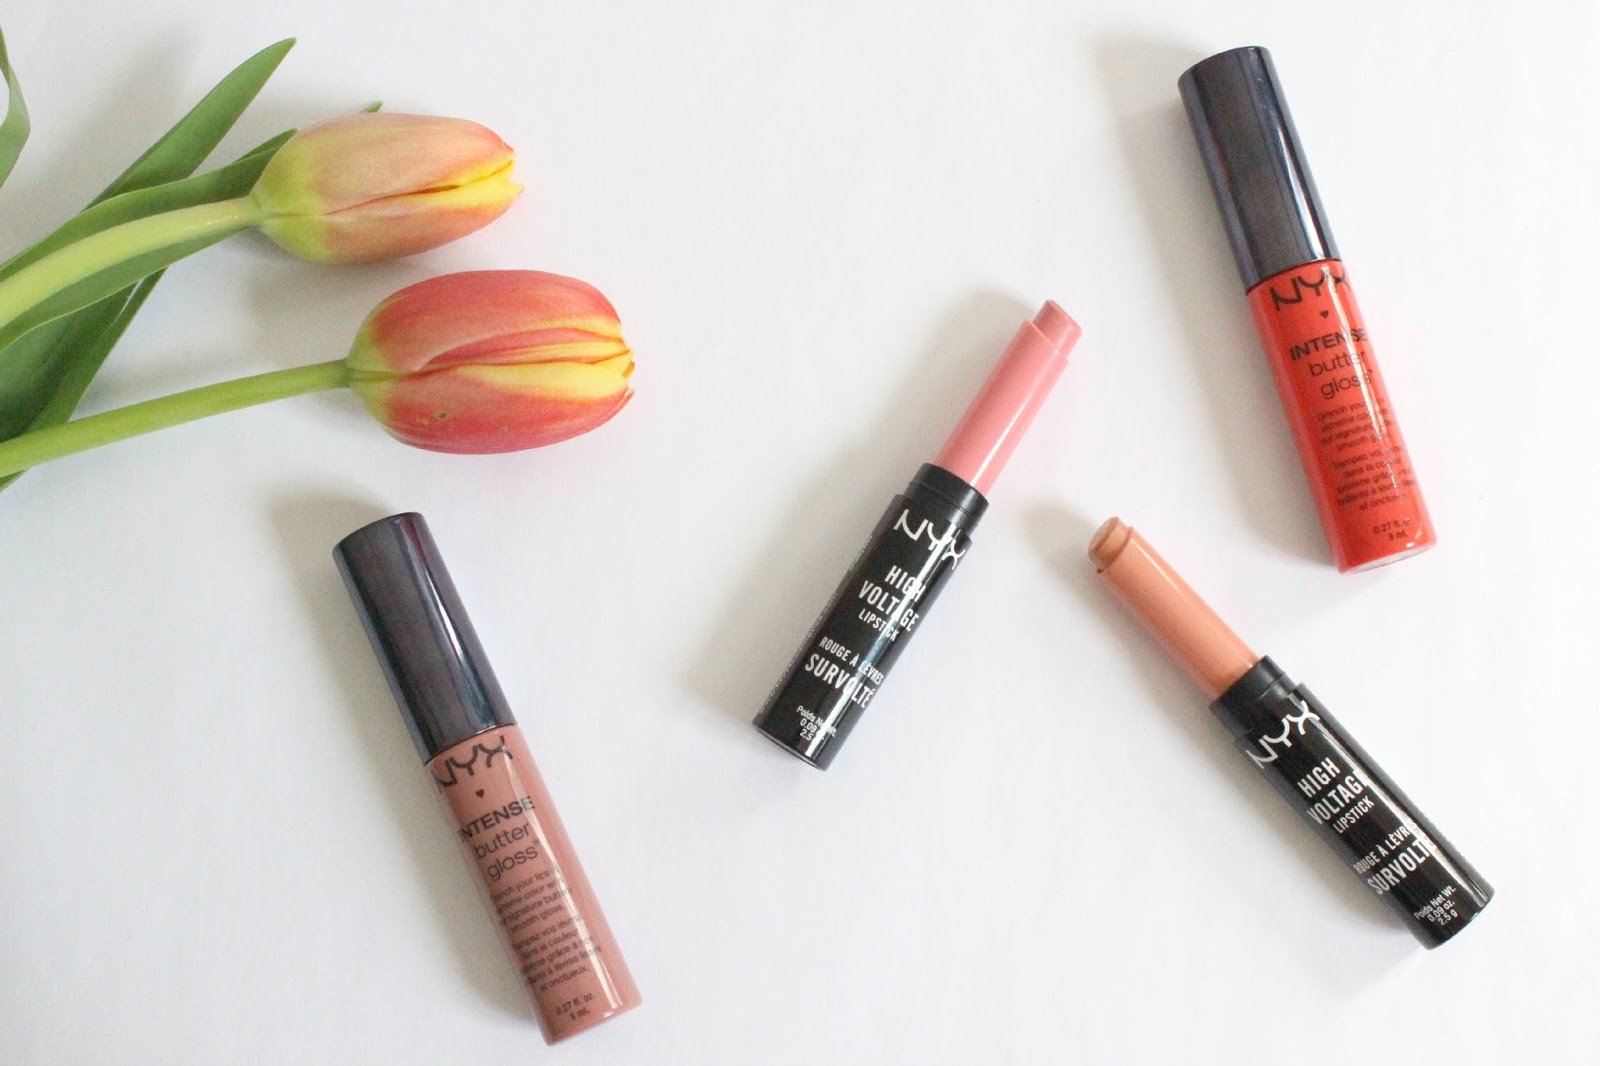 NYX Spring 2015 Lip Products | NYX Intense Butter Gloss and NYX High Voltage Lipstick